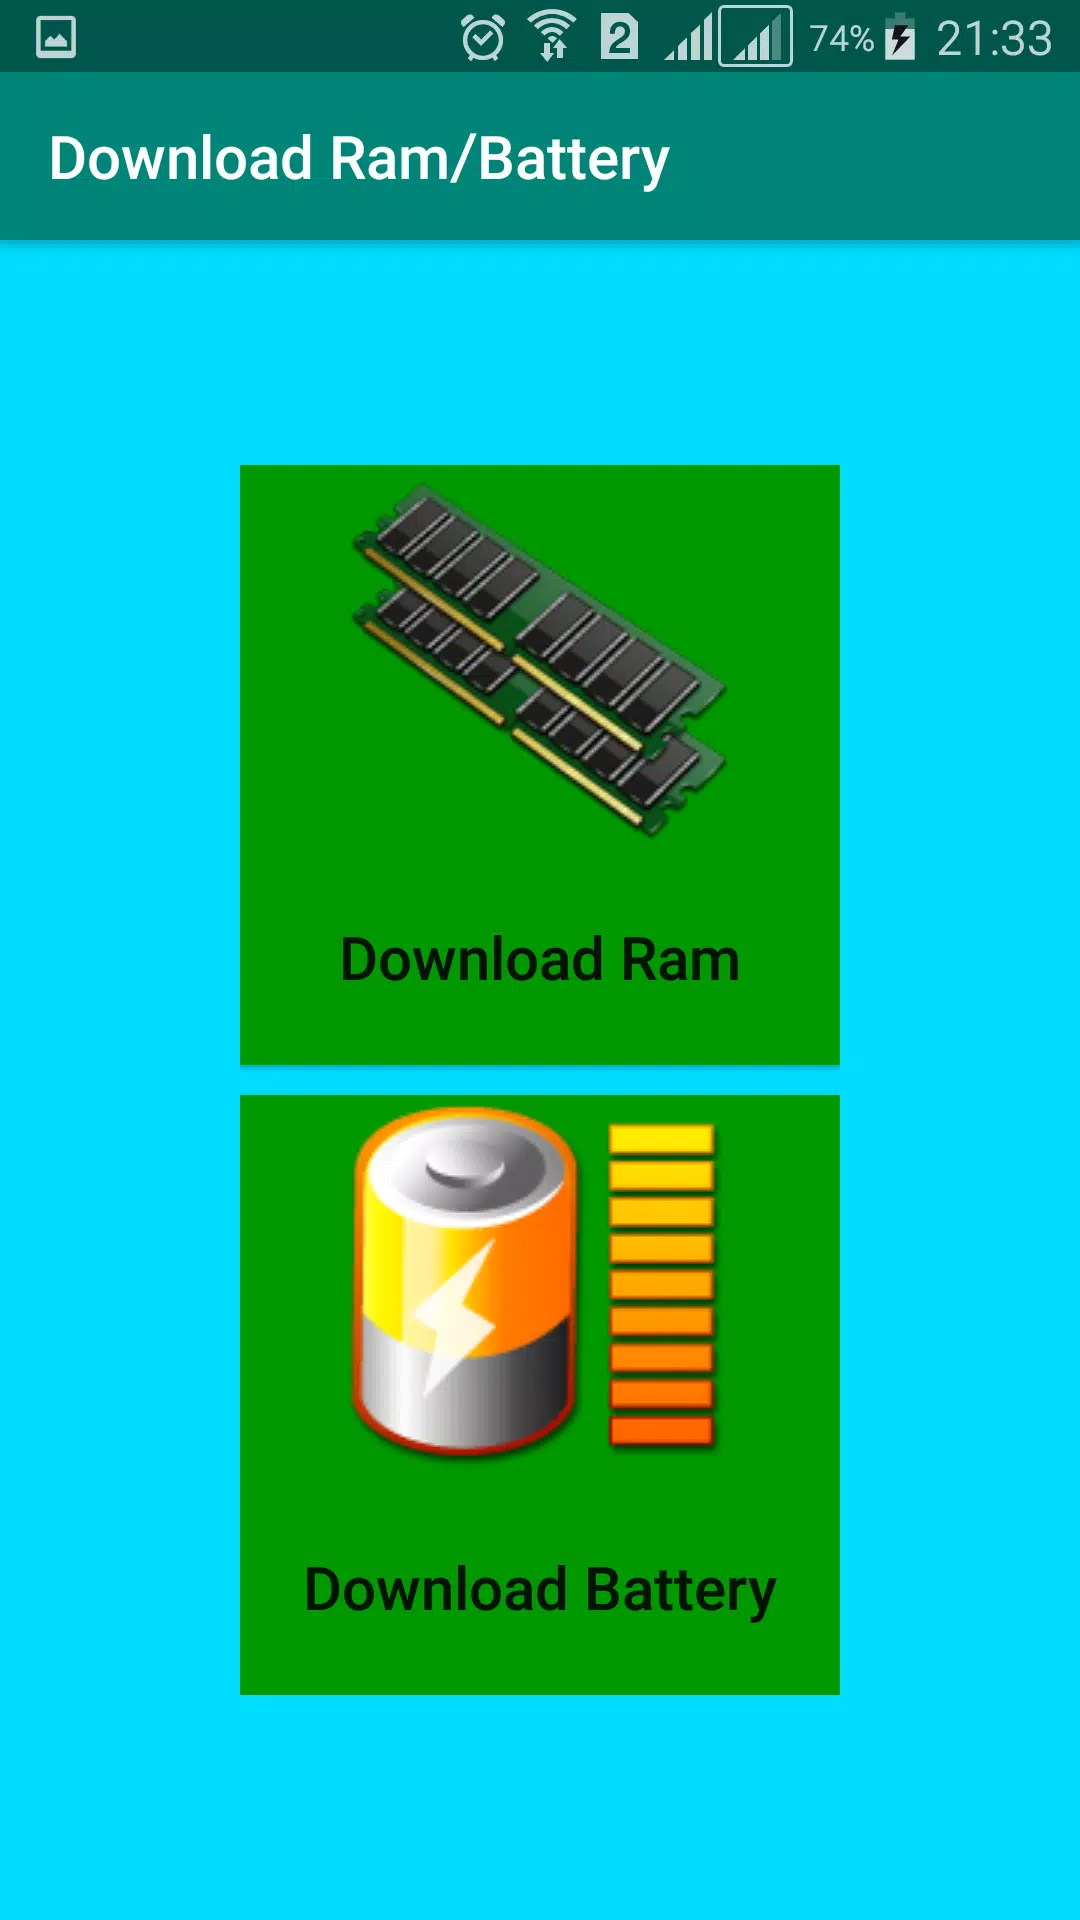 Download More Ram And Battery APK pour Android Télécharger